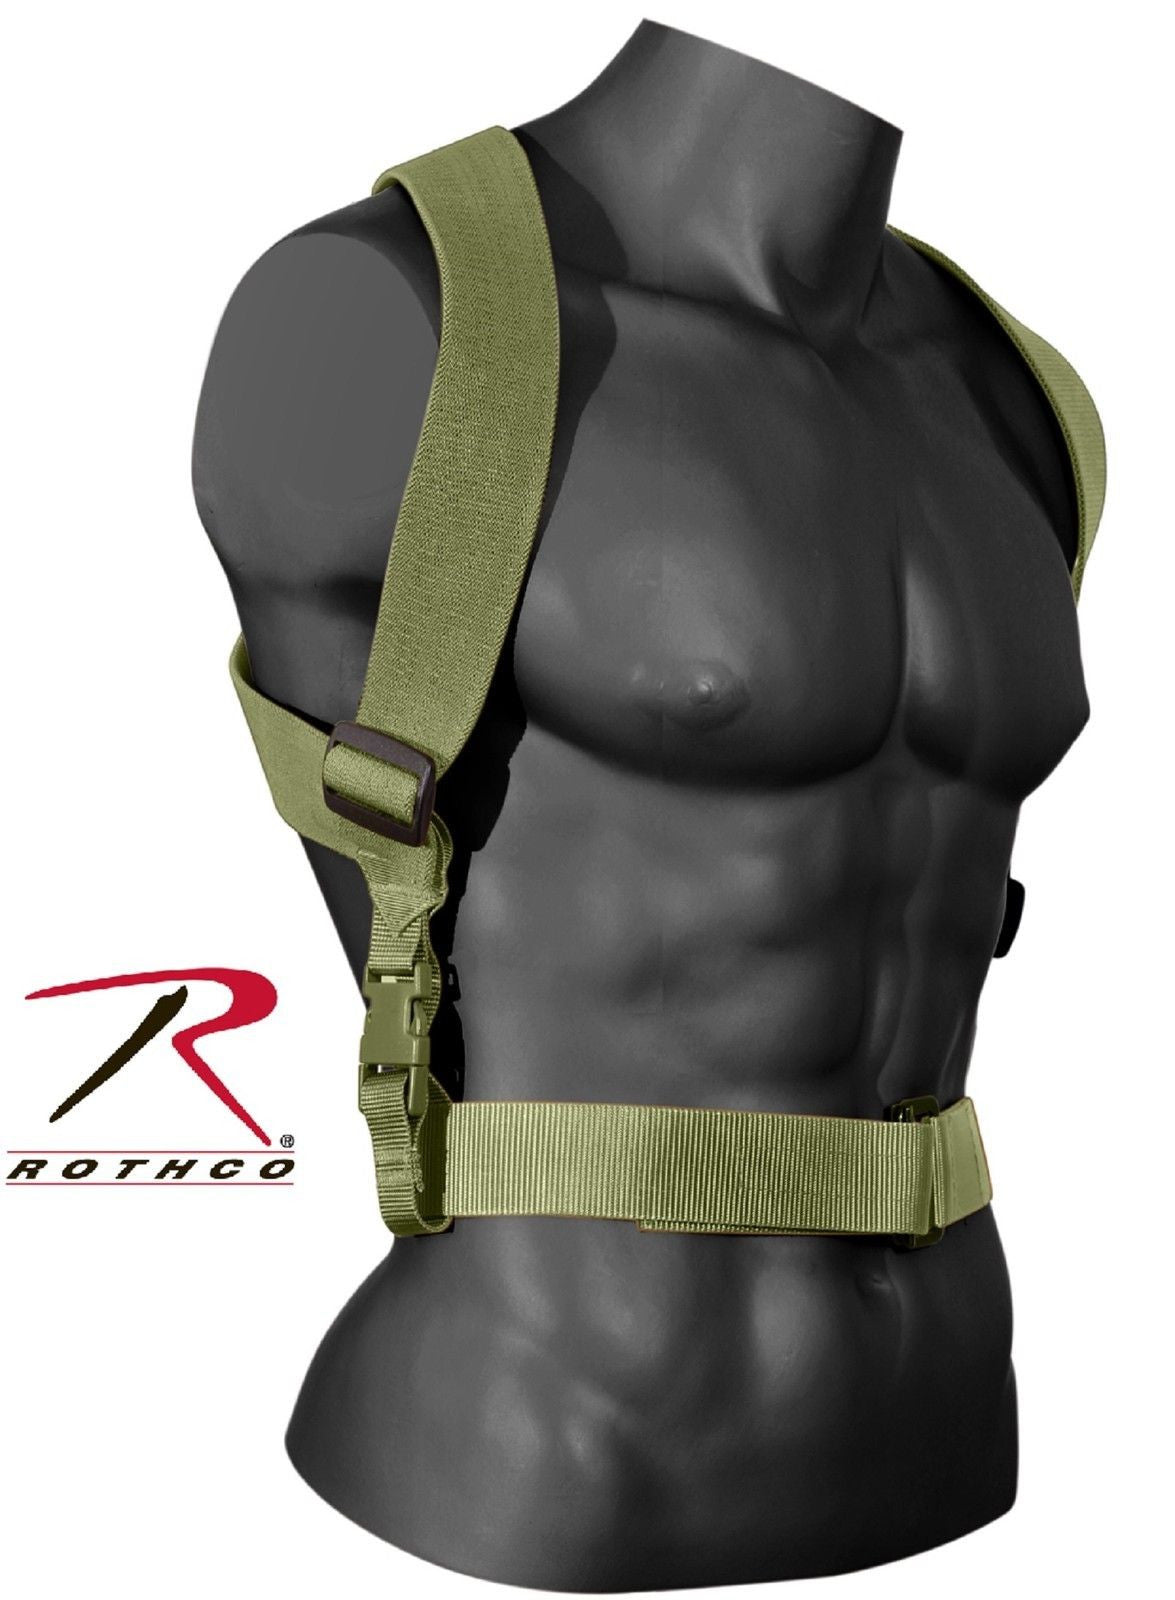 Olive Drab Tactical Combat Suspenders - Rothco Adjustable Gear Support Suspender